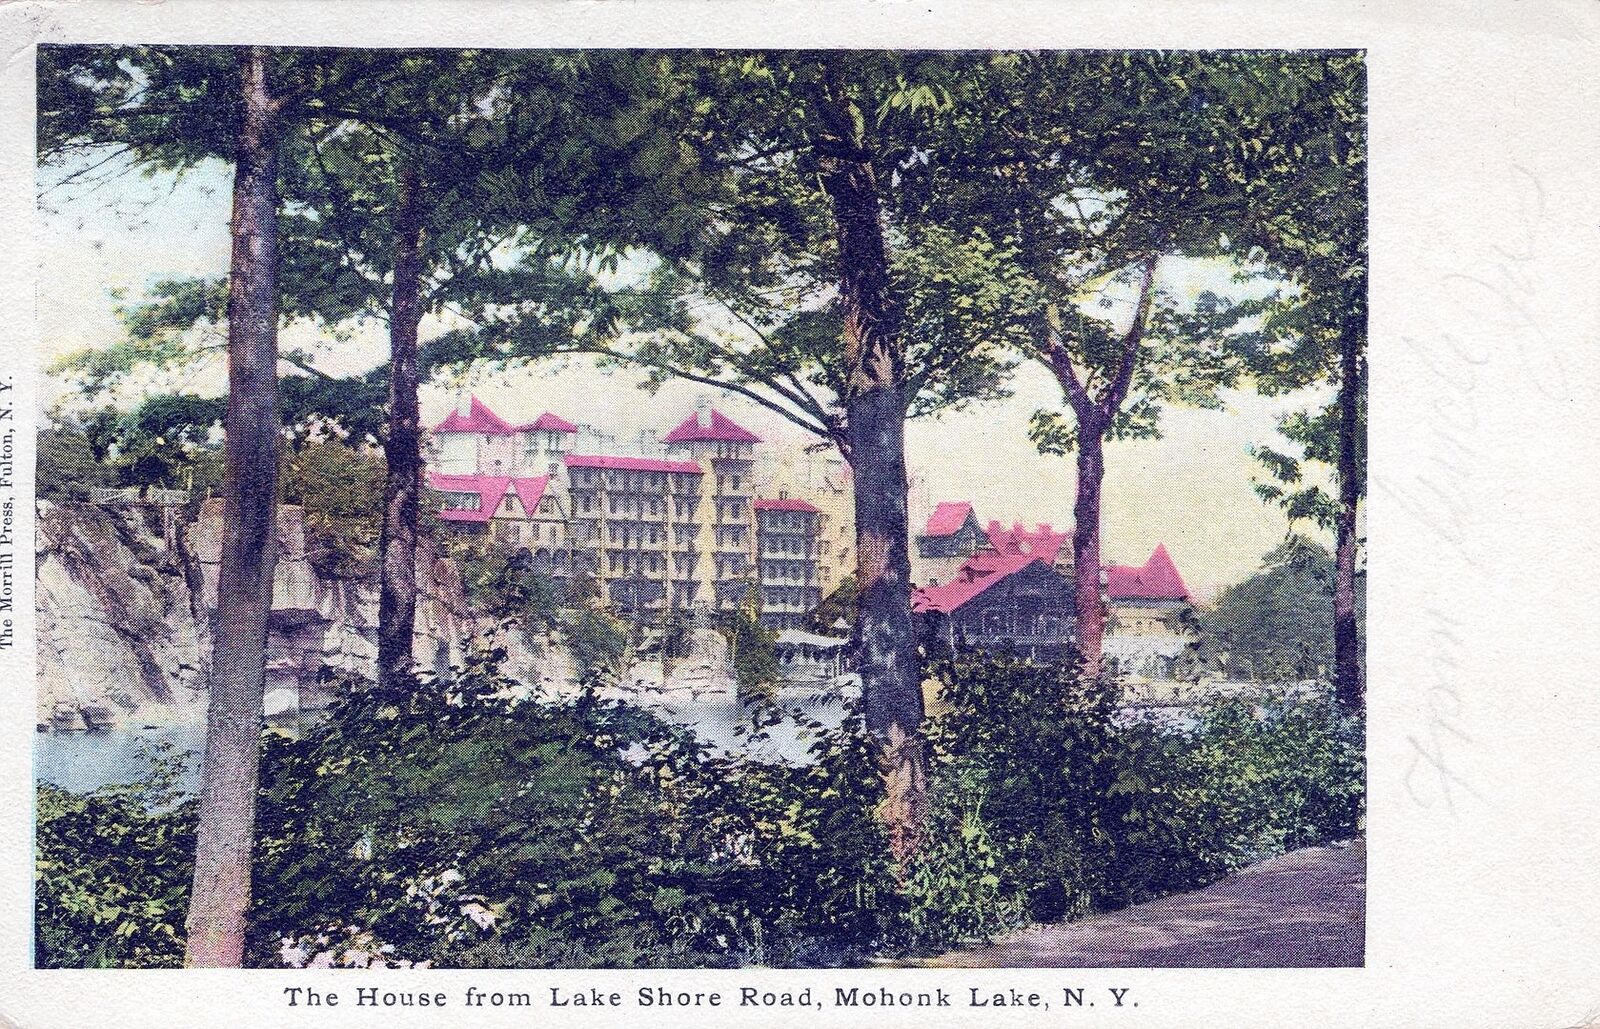 MOHONK LAKE NY - The House From Lake Shore Road Postcard - udb - mailed 1908